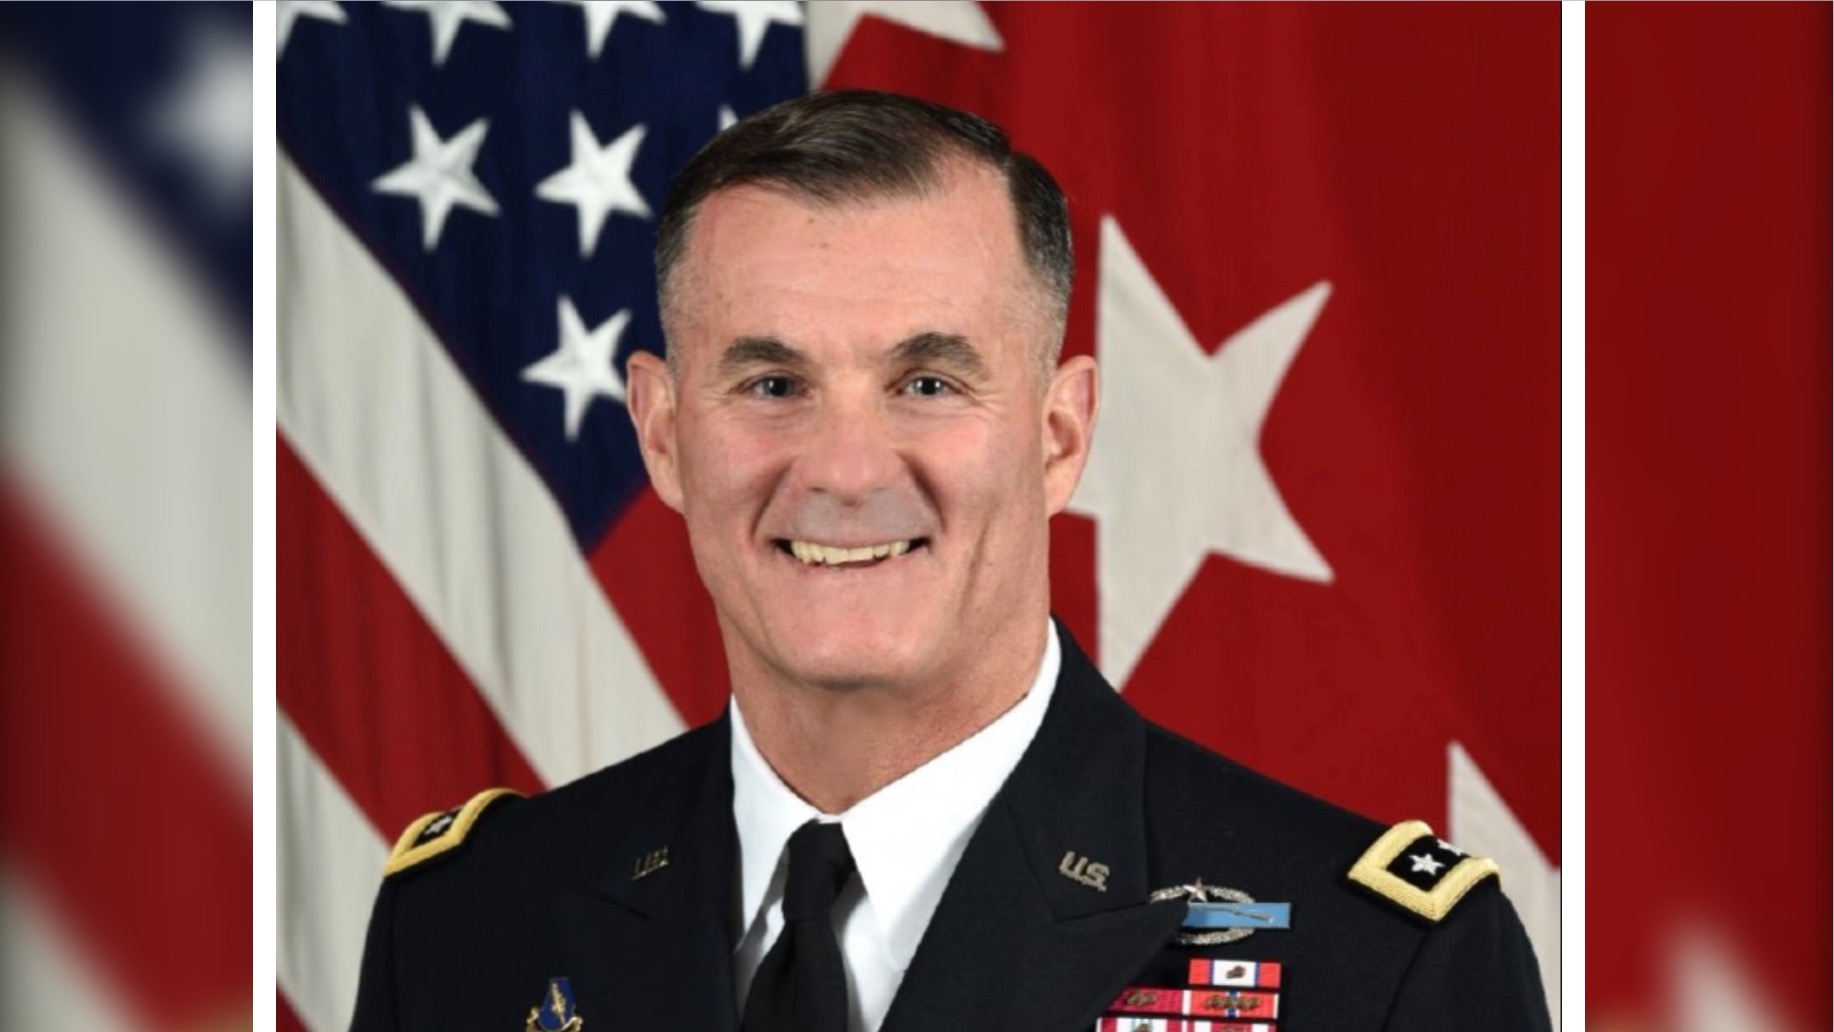 Lt. Gen. Charles Flynn, Brother of Michael Flynn, Tapped to Head U.S. Army Pacific